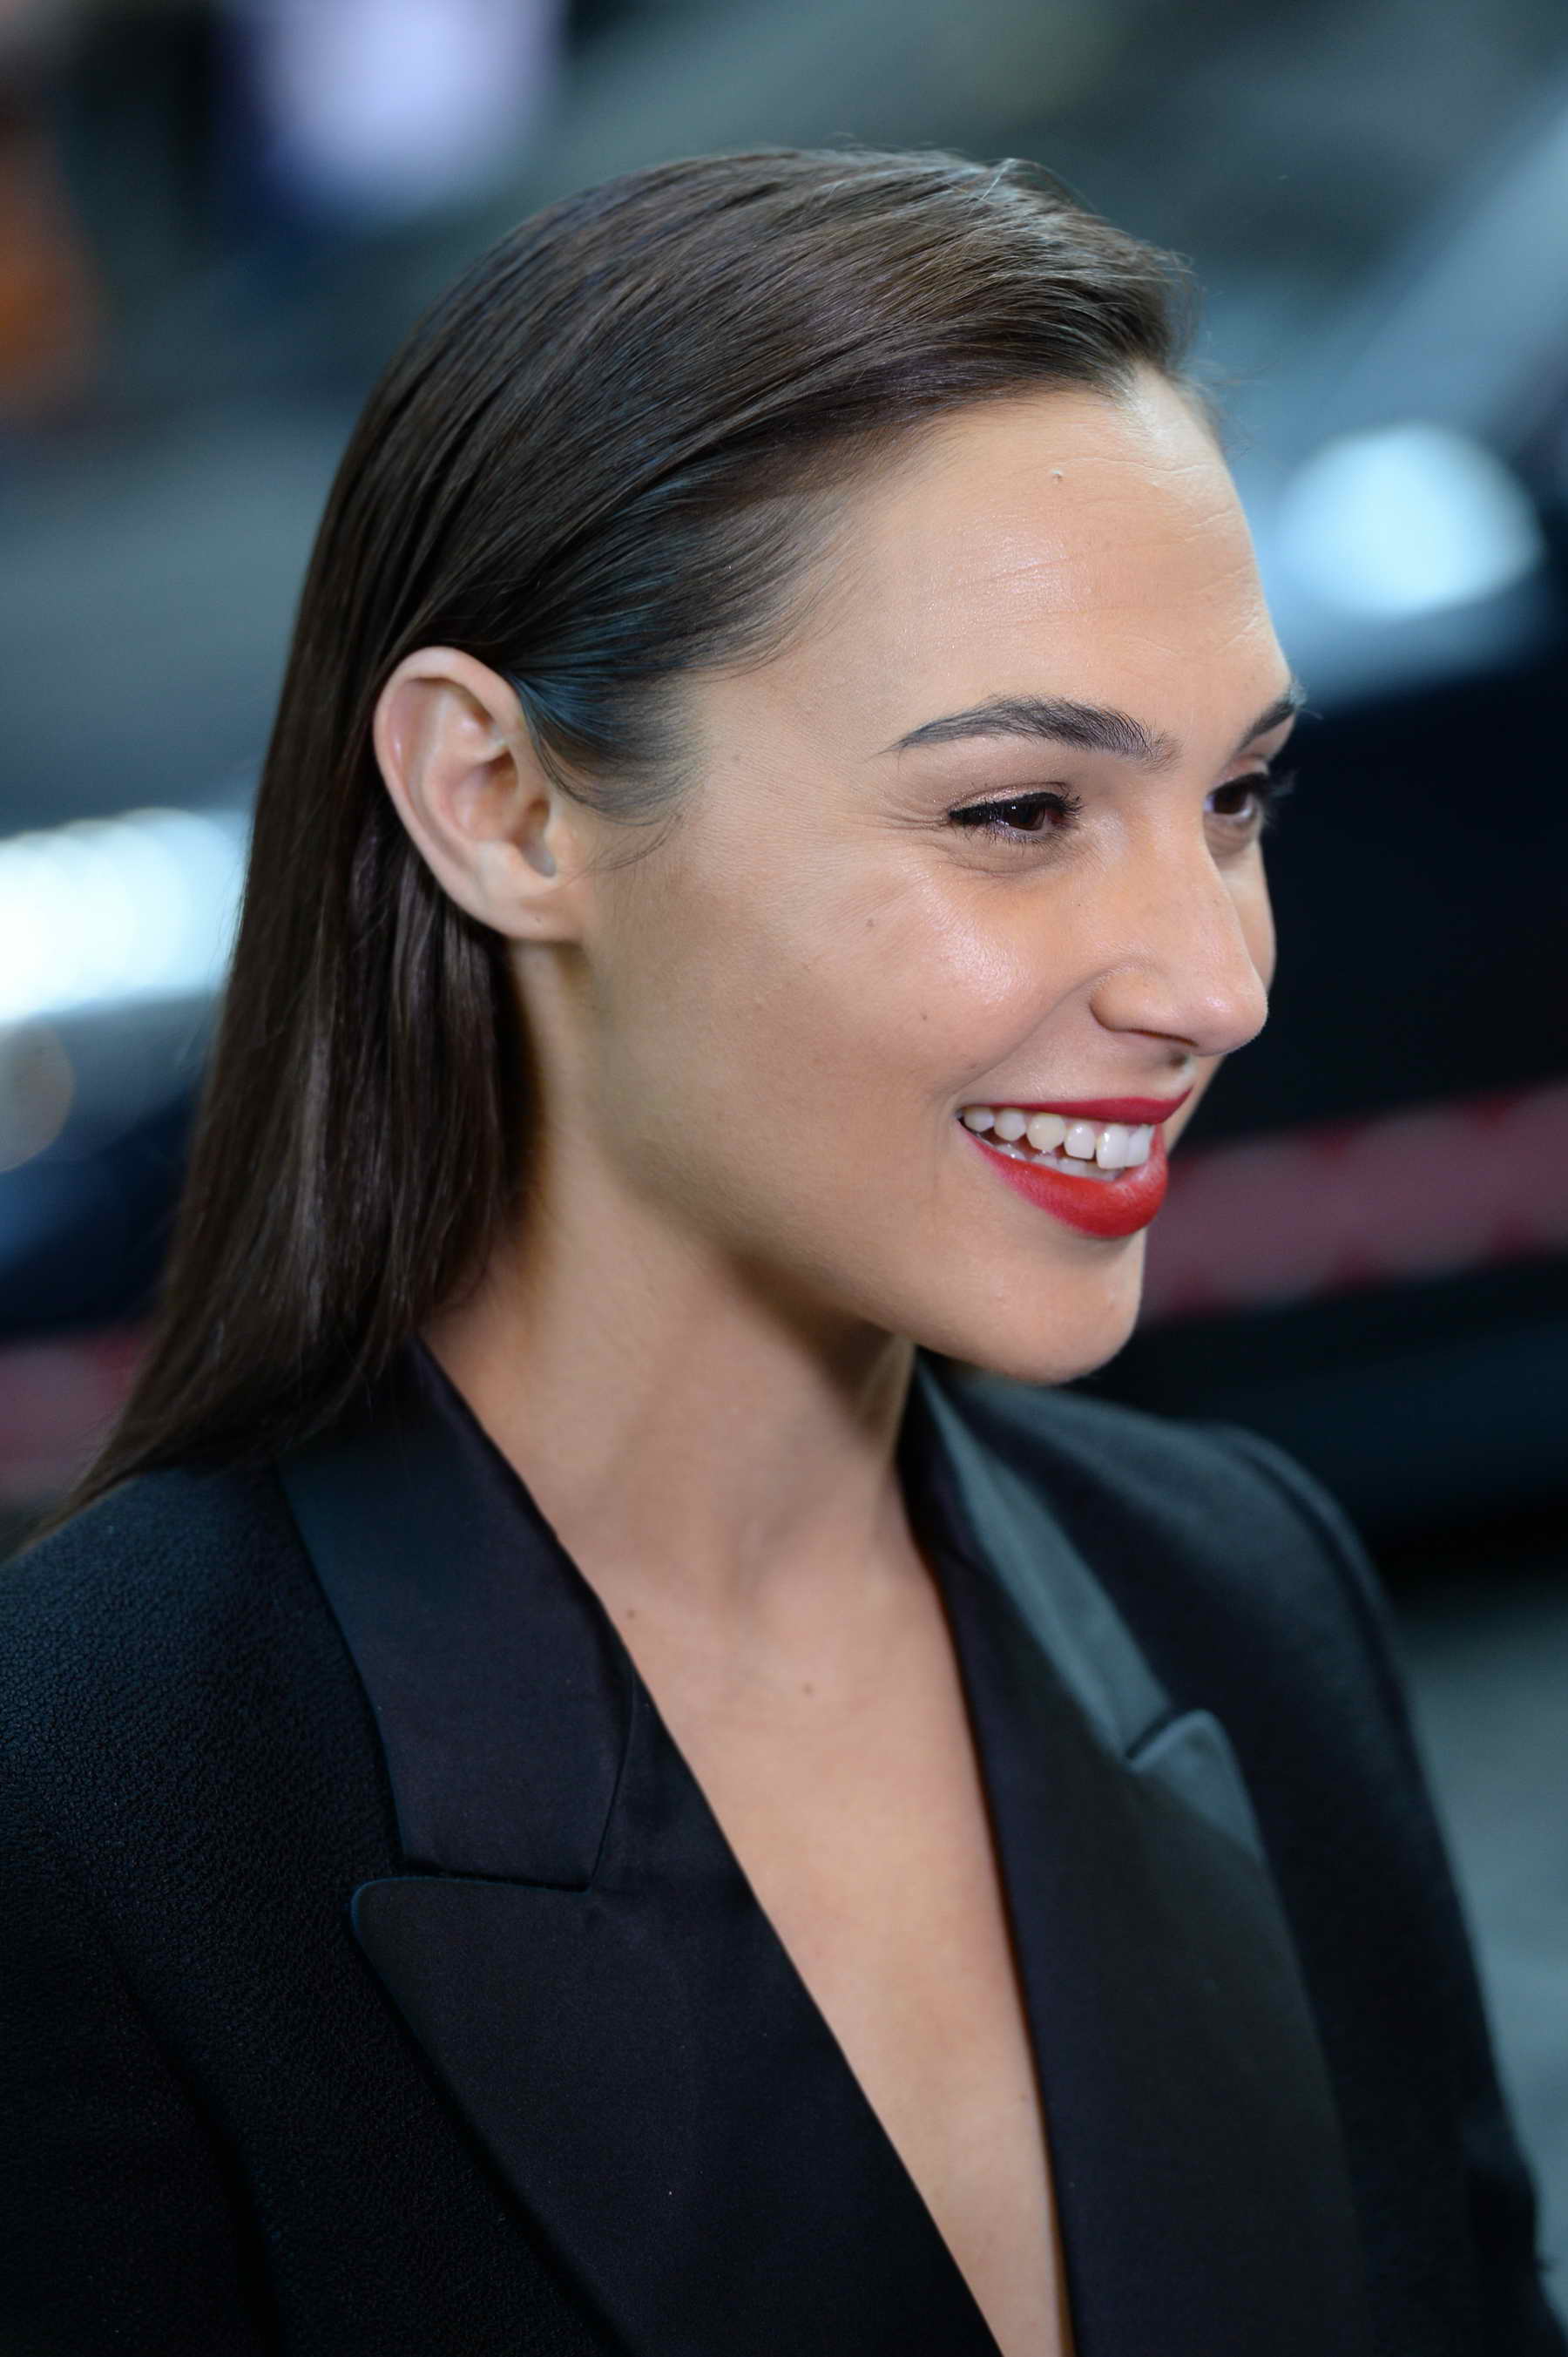 Gal Gadot At The Criminal Premiere In London Celeb Donut Ever wonder what filming with the most wonderful team looks like? gal gadot at the criminal premiere in